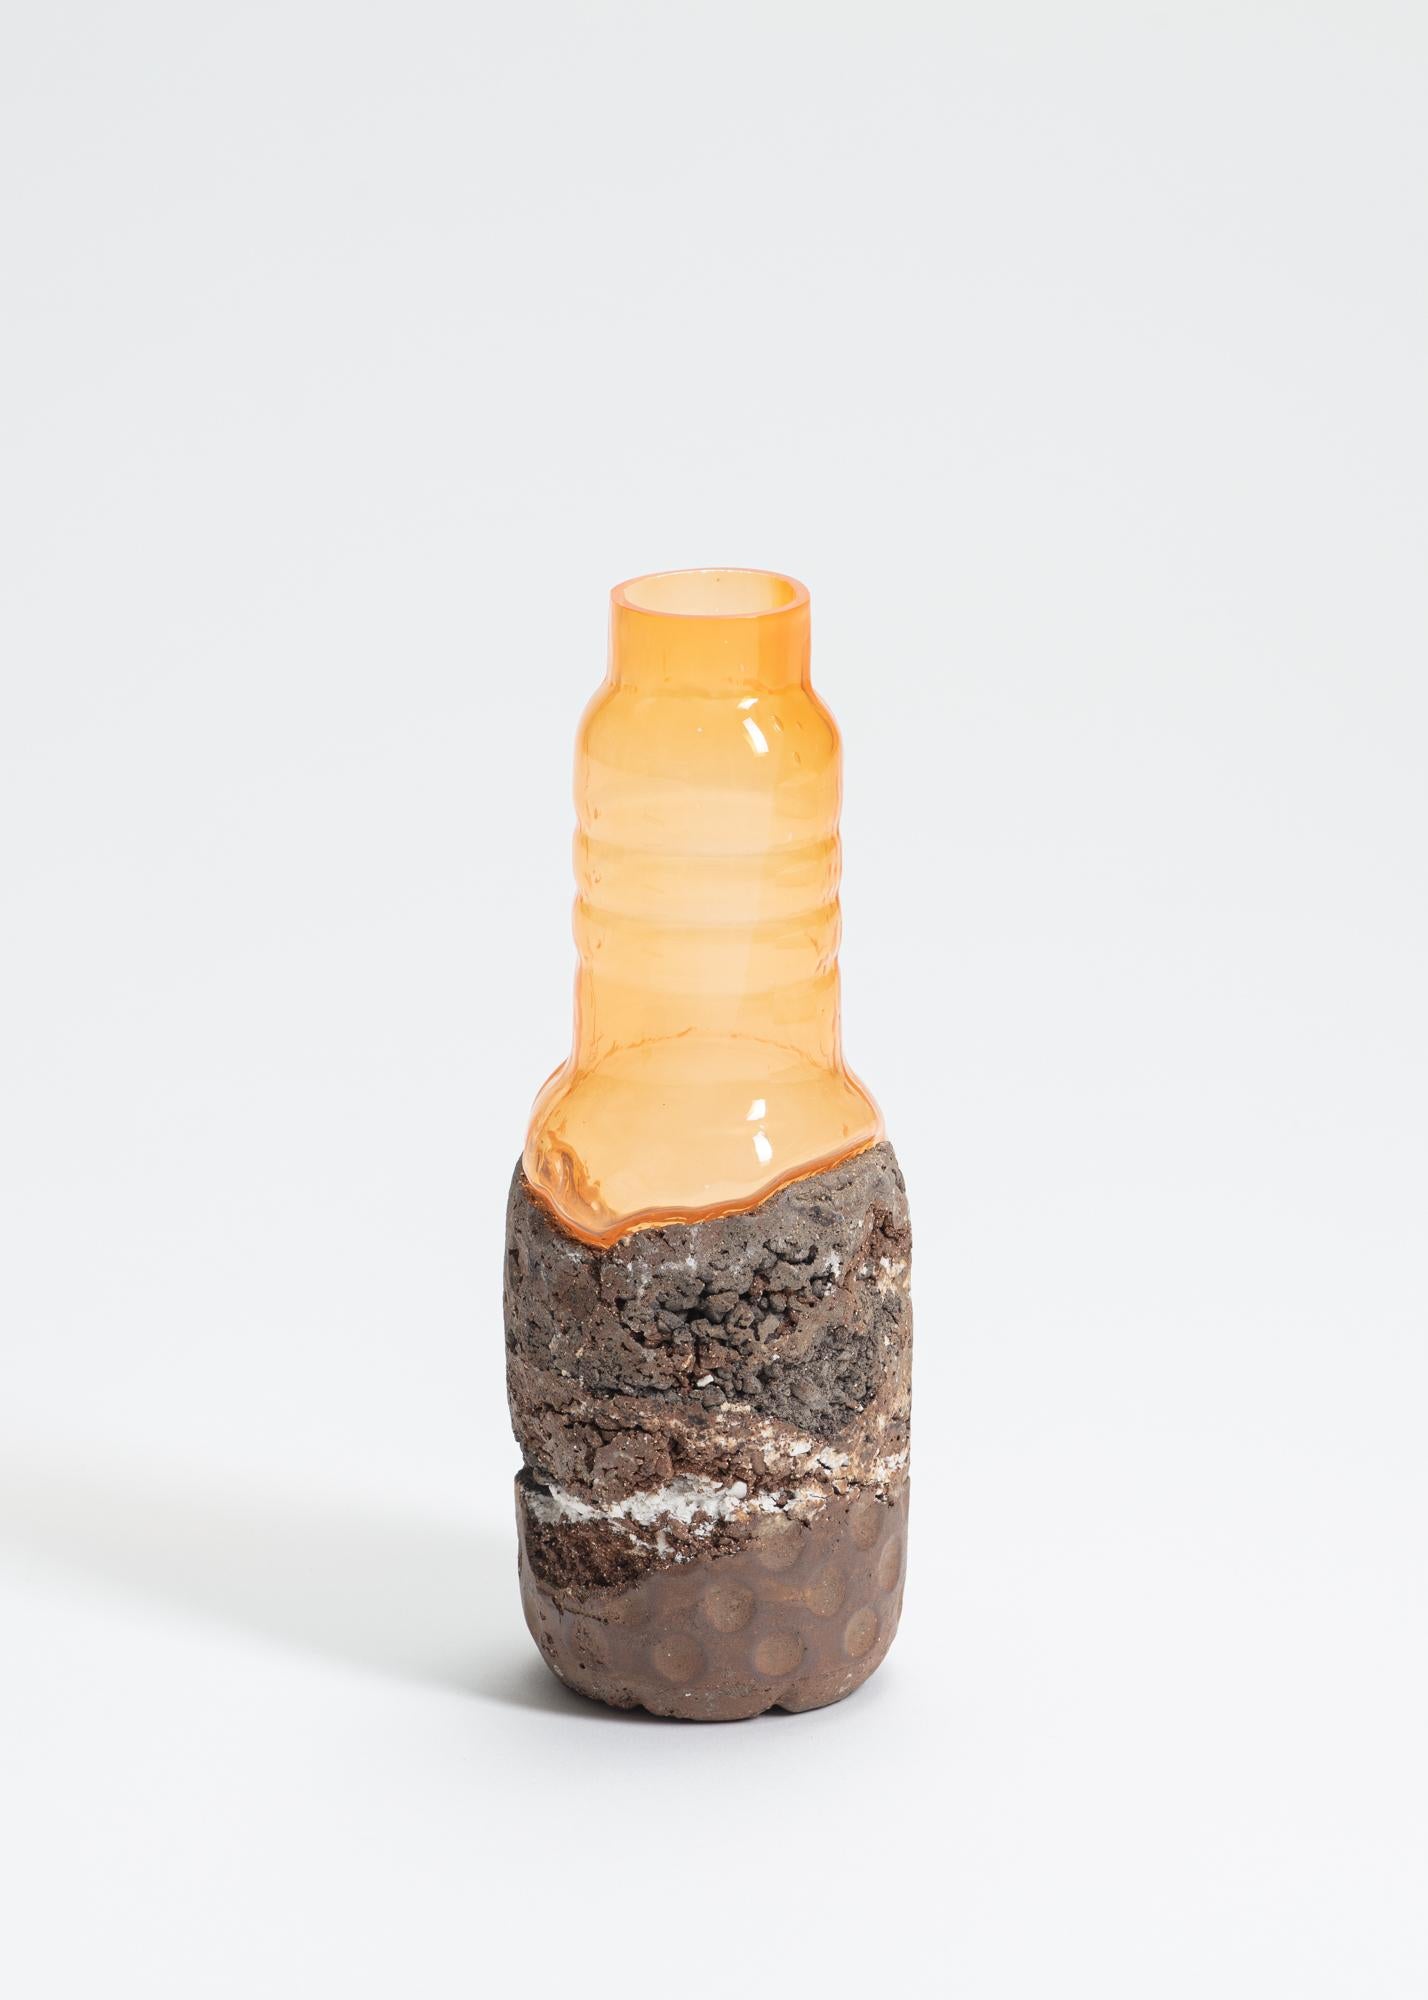 FUWA FUWA, No 12 bottle by Yusuke´ Y. Offhause
One of a kind, the work is in two parts (ceramic and glass).
Dimensions: D 8.8 x W 8.8 x H 23 cm.
Materials: stoneware, porcelain, glass.

Yusuke´ Y. Offhause:
